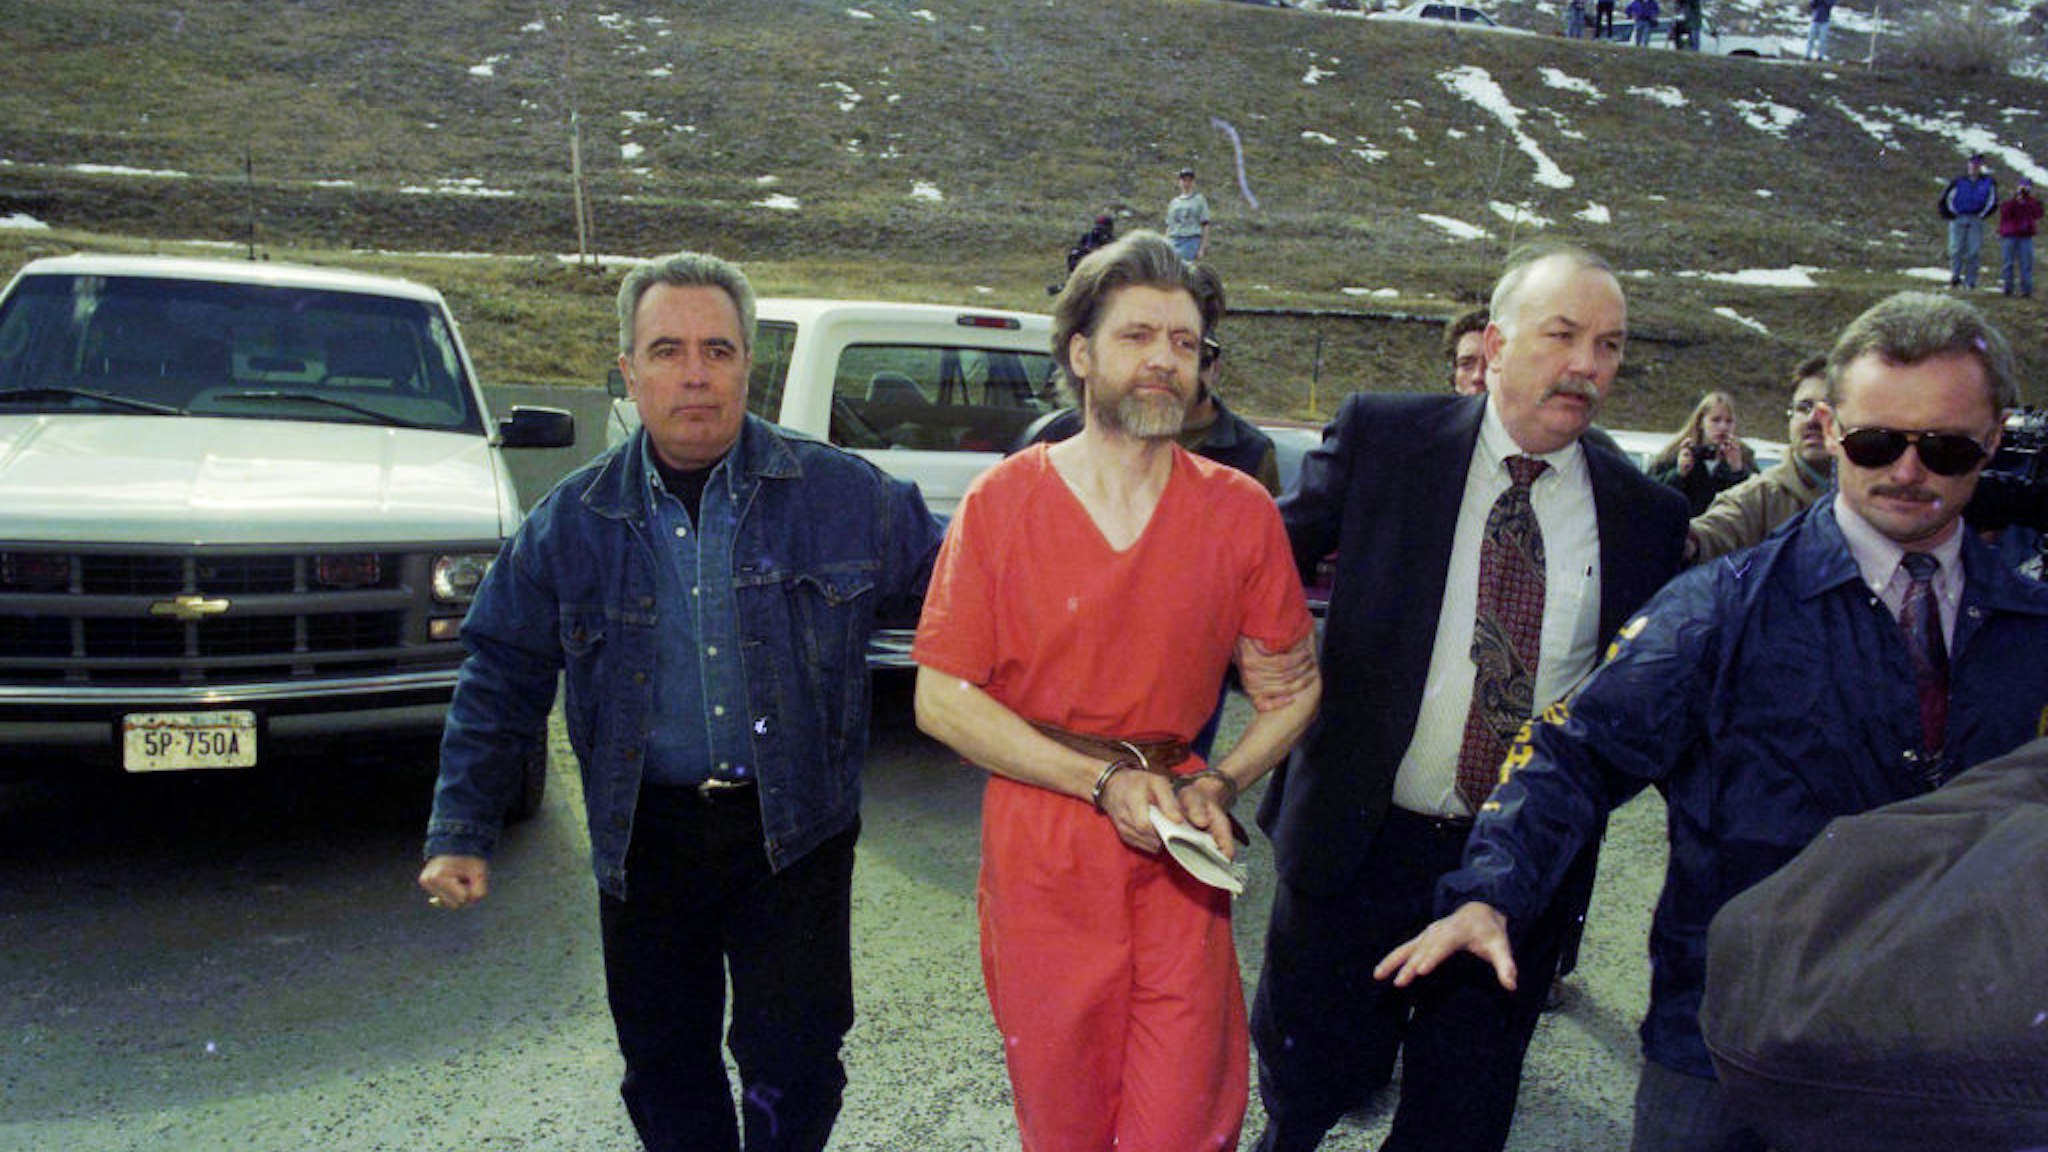 Theodore 'Ted' Kaczynski (in orange) is guided to his arraignment by federal marshals, Helena, Montana, April 4, 1996. He had been arrested in connection with the 'Unabomber' bombings and the deaths those explosions caused.